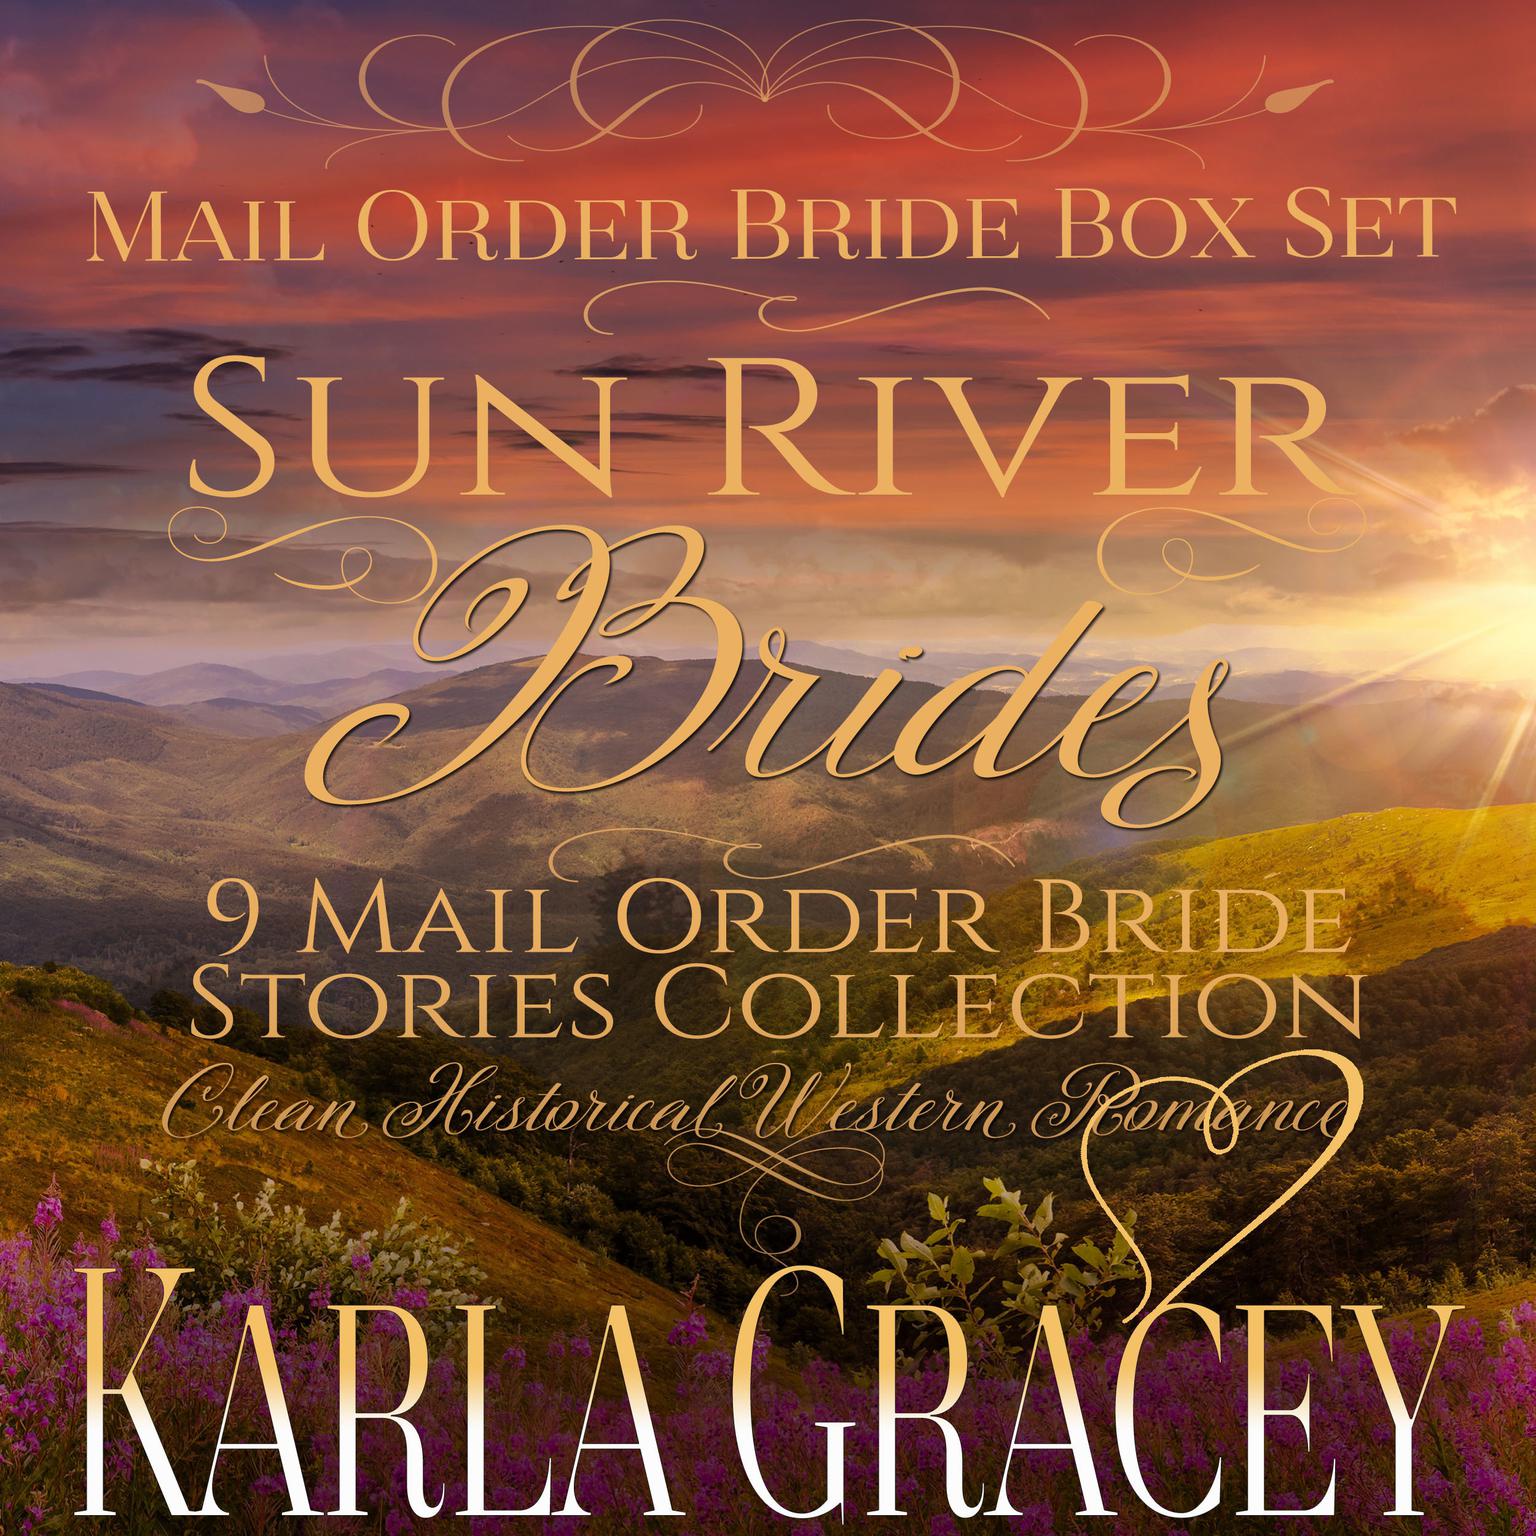 Mail Order Bride Box Set - Sun River Brides - 9 Mail Order Bride Stories Collection Audiobook, by Karla Gracey